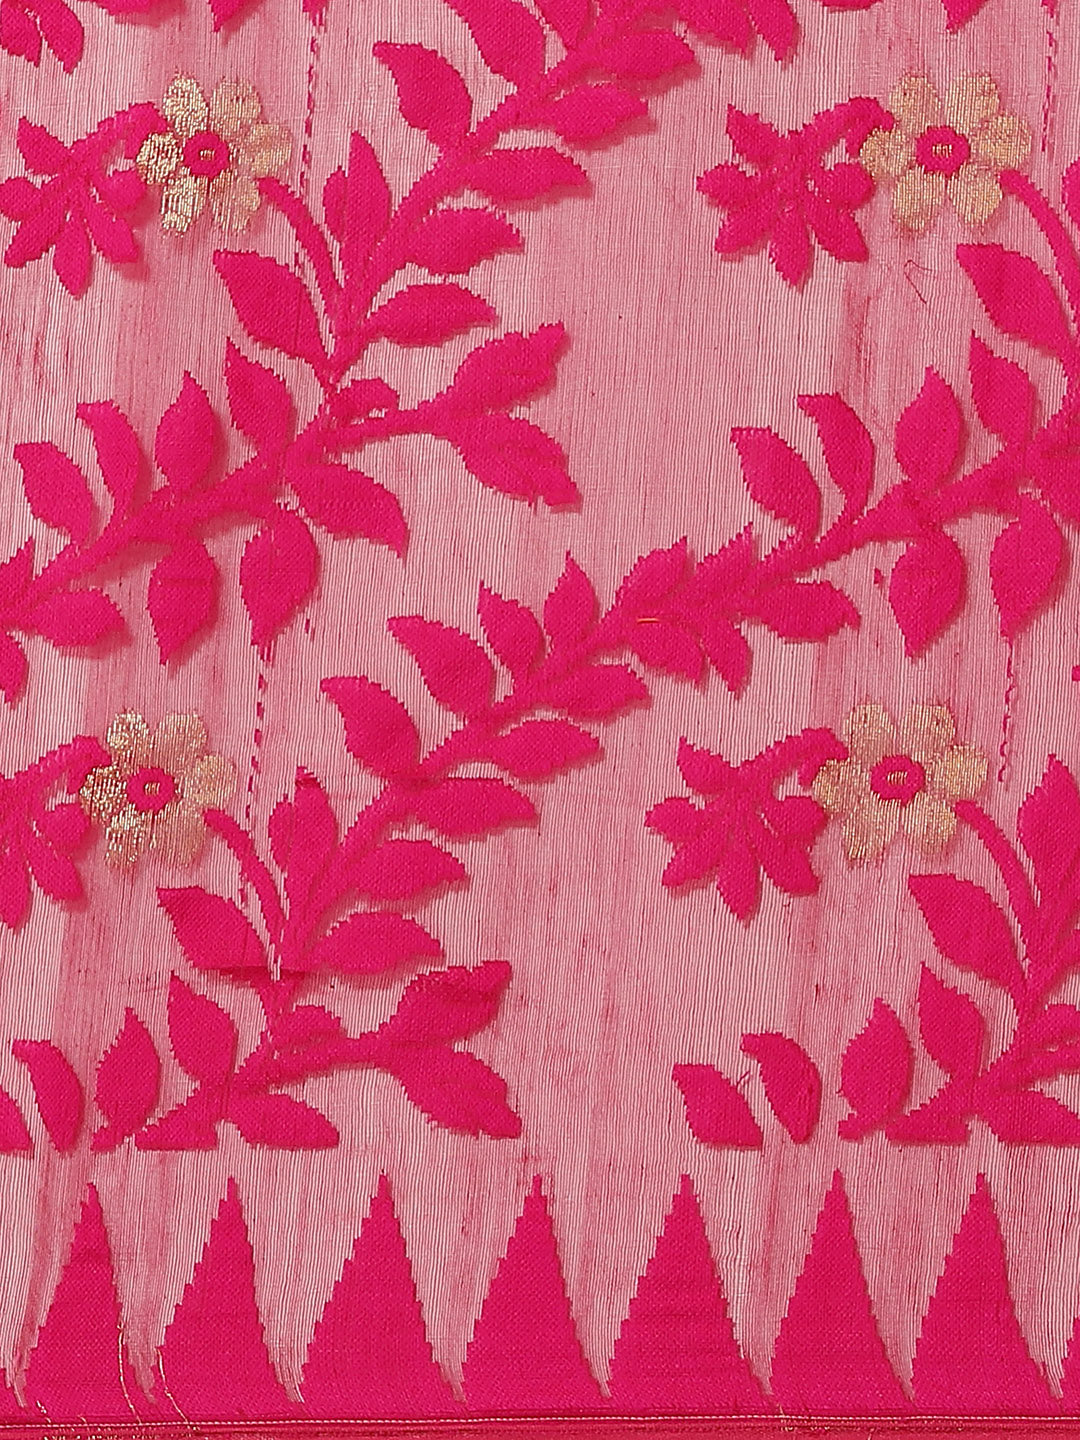 Pink and Gold, Kalakari India Jamdani Silk Cotton Woven Design Saree without blouse CHBHSA0027-Saree-Kalakari India-CHBHSA0027-Bengal, Geographical Indication, Hand Crafted, Hand Painted, Heritage Prints, Jamdani, Natural Dyes, Red, Sarees, Silk Blended, Sustainable Fabrics, Woven, Yellow-[Linen,Ethnic,wear,Fashionista,Handloom,Handicraft,Indigo,blockprint,block,print,Cotton,Chanderi,Blue, latest,classy,party,bollywood,trendy,summer,style,traditional,formal,elegant,unique,style,hand,block,print,